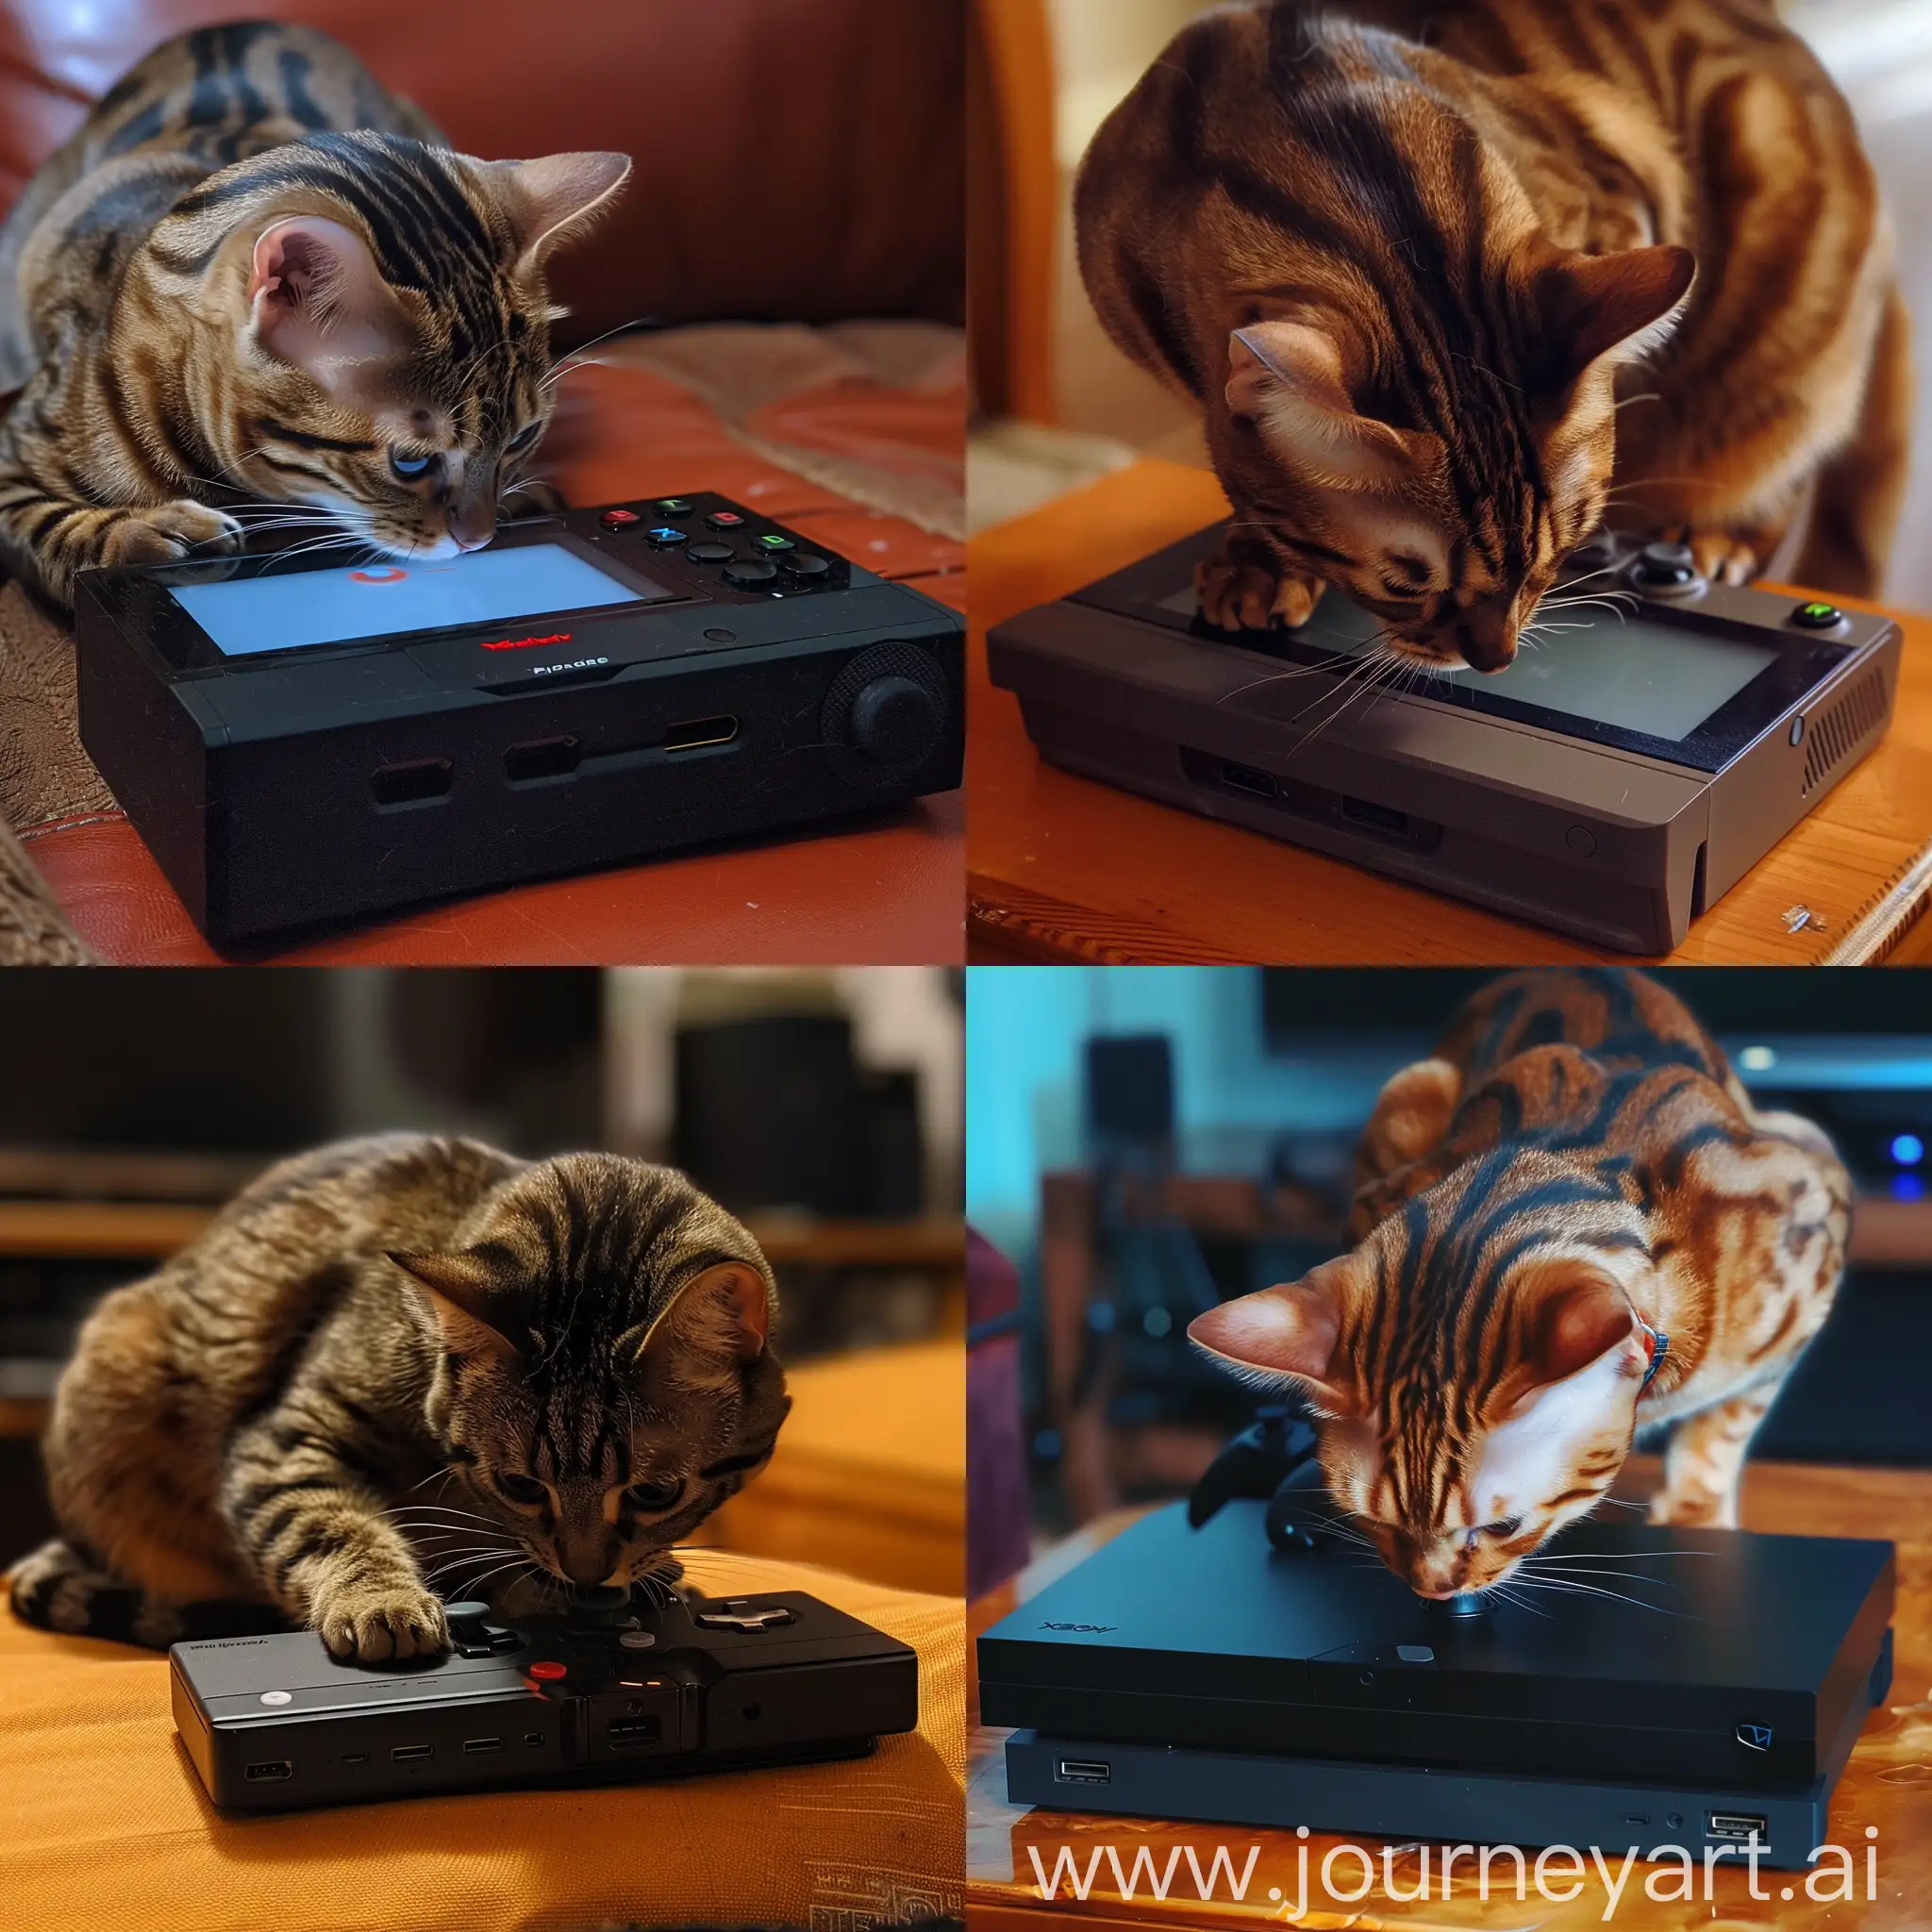 Playful-Cat-Engaged-with-a-Game-Console